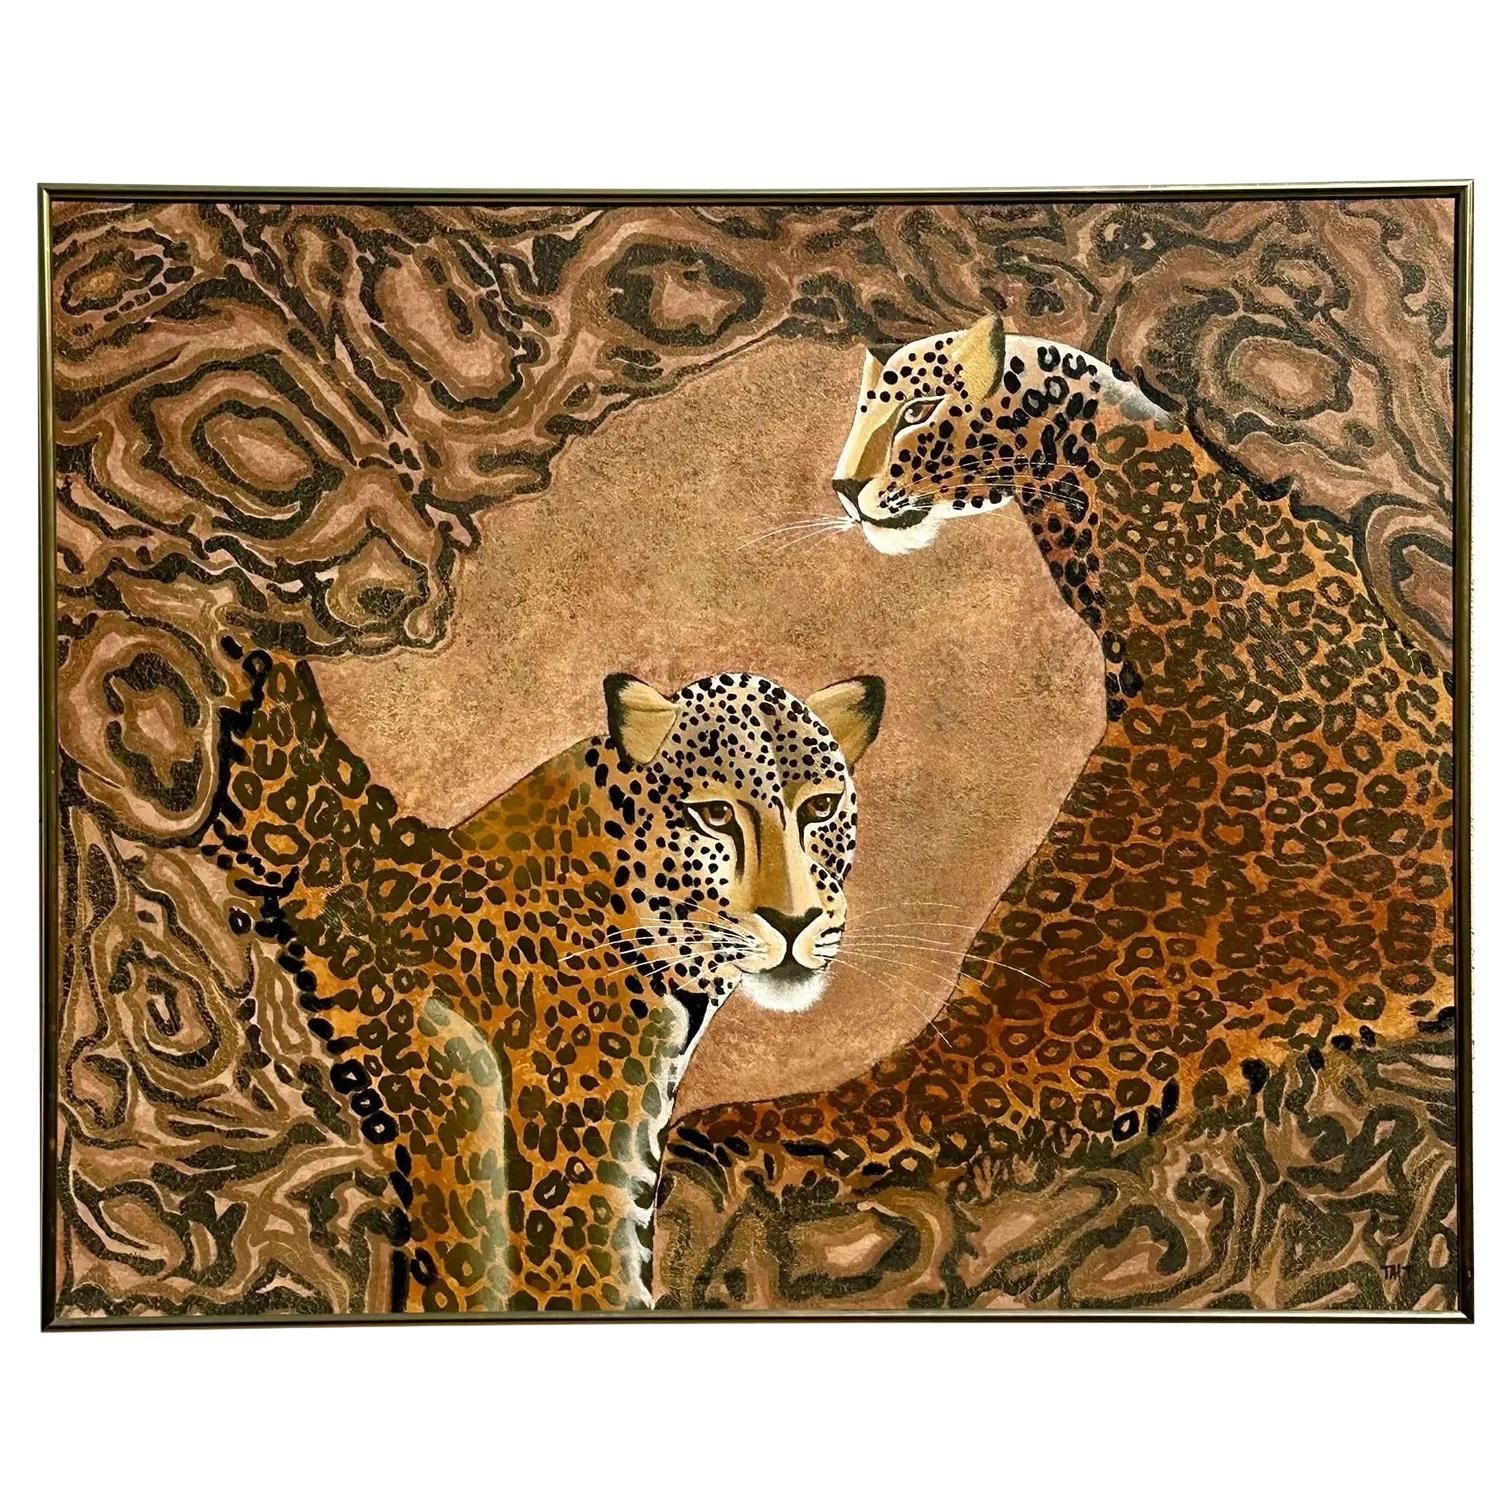 Vintage Boho Signed Original Oil Painting of Cheetahs For Sale